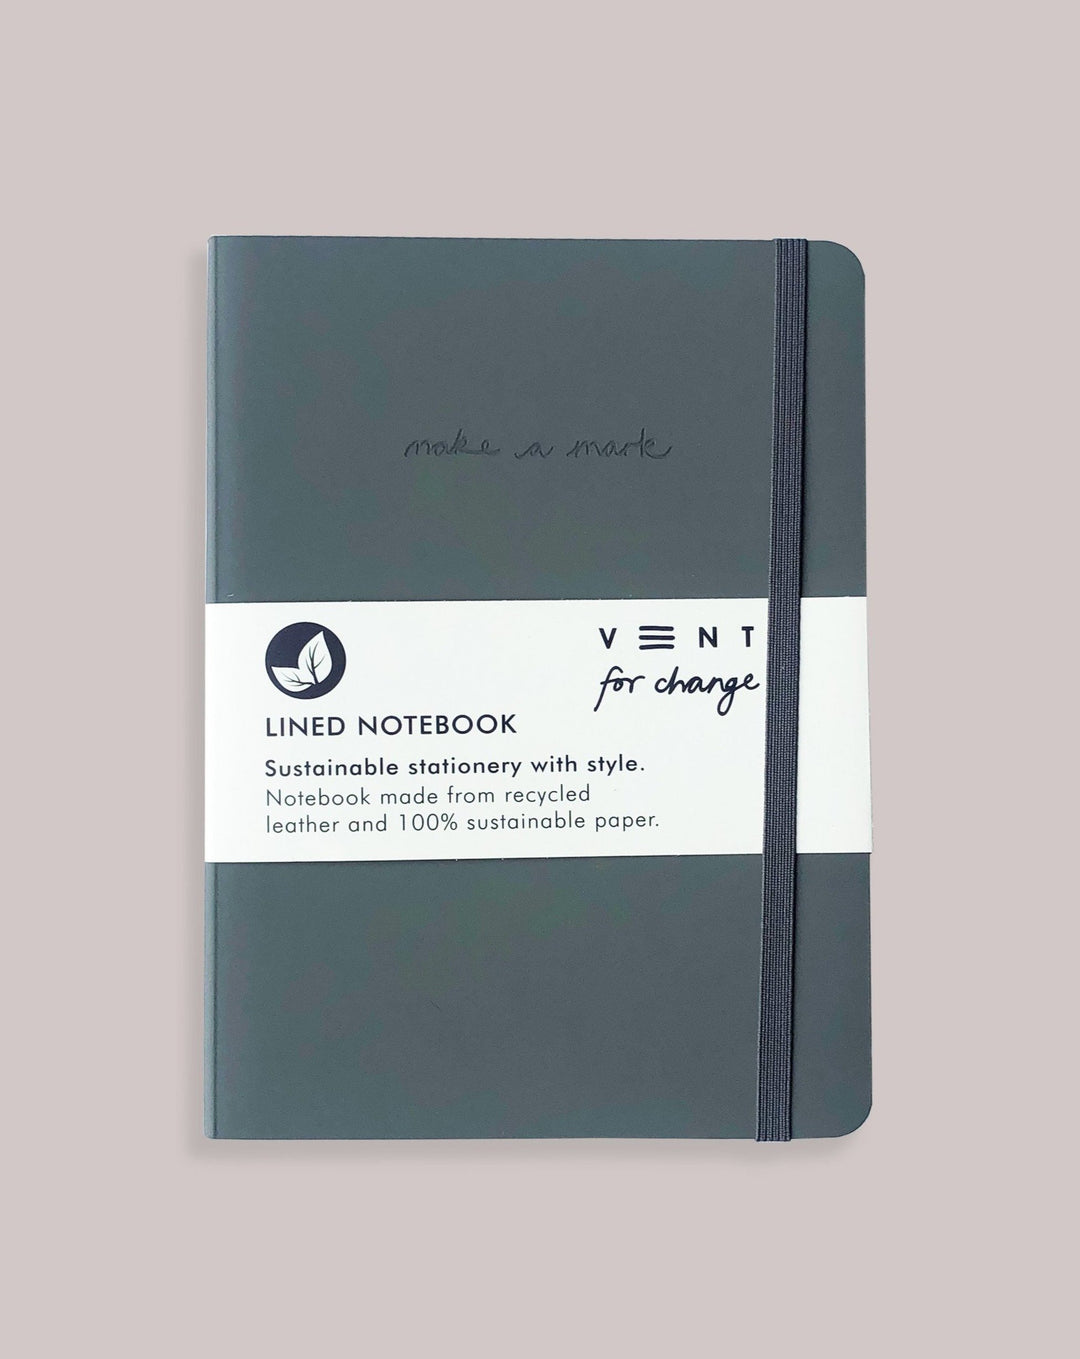 VENT FOR CHANGE NOTEBOOK 'Make a Mark' A5 Lined Notebook – Grey